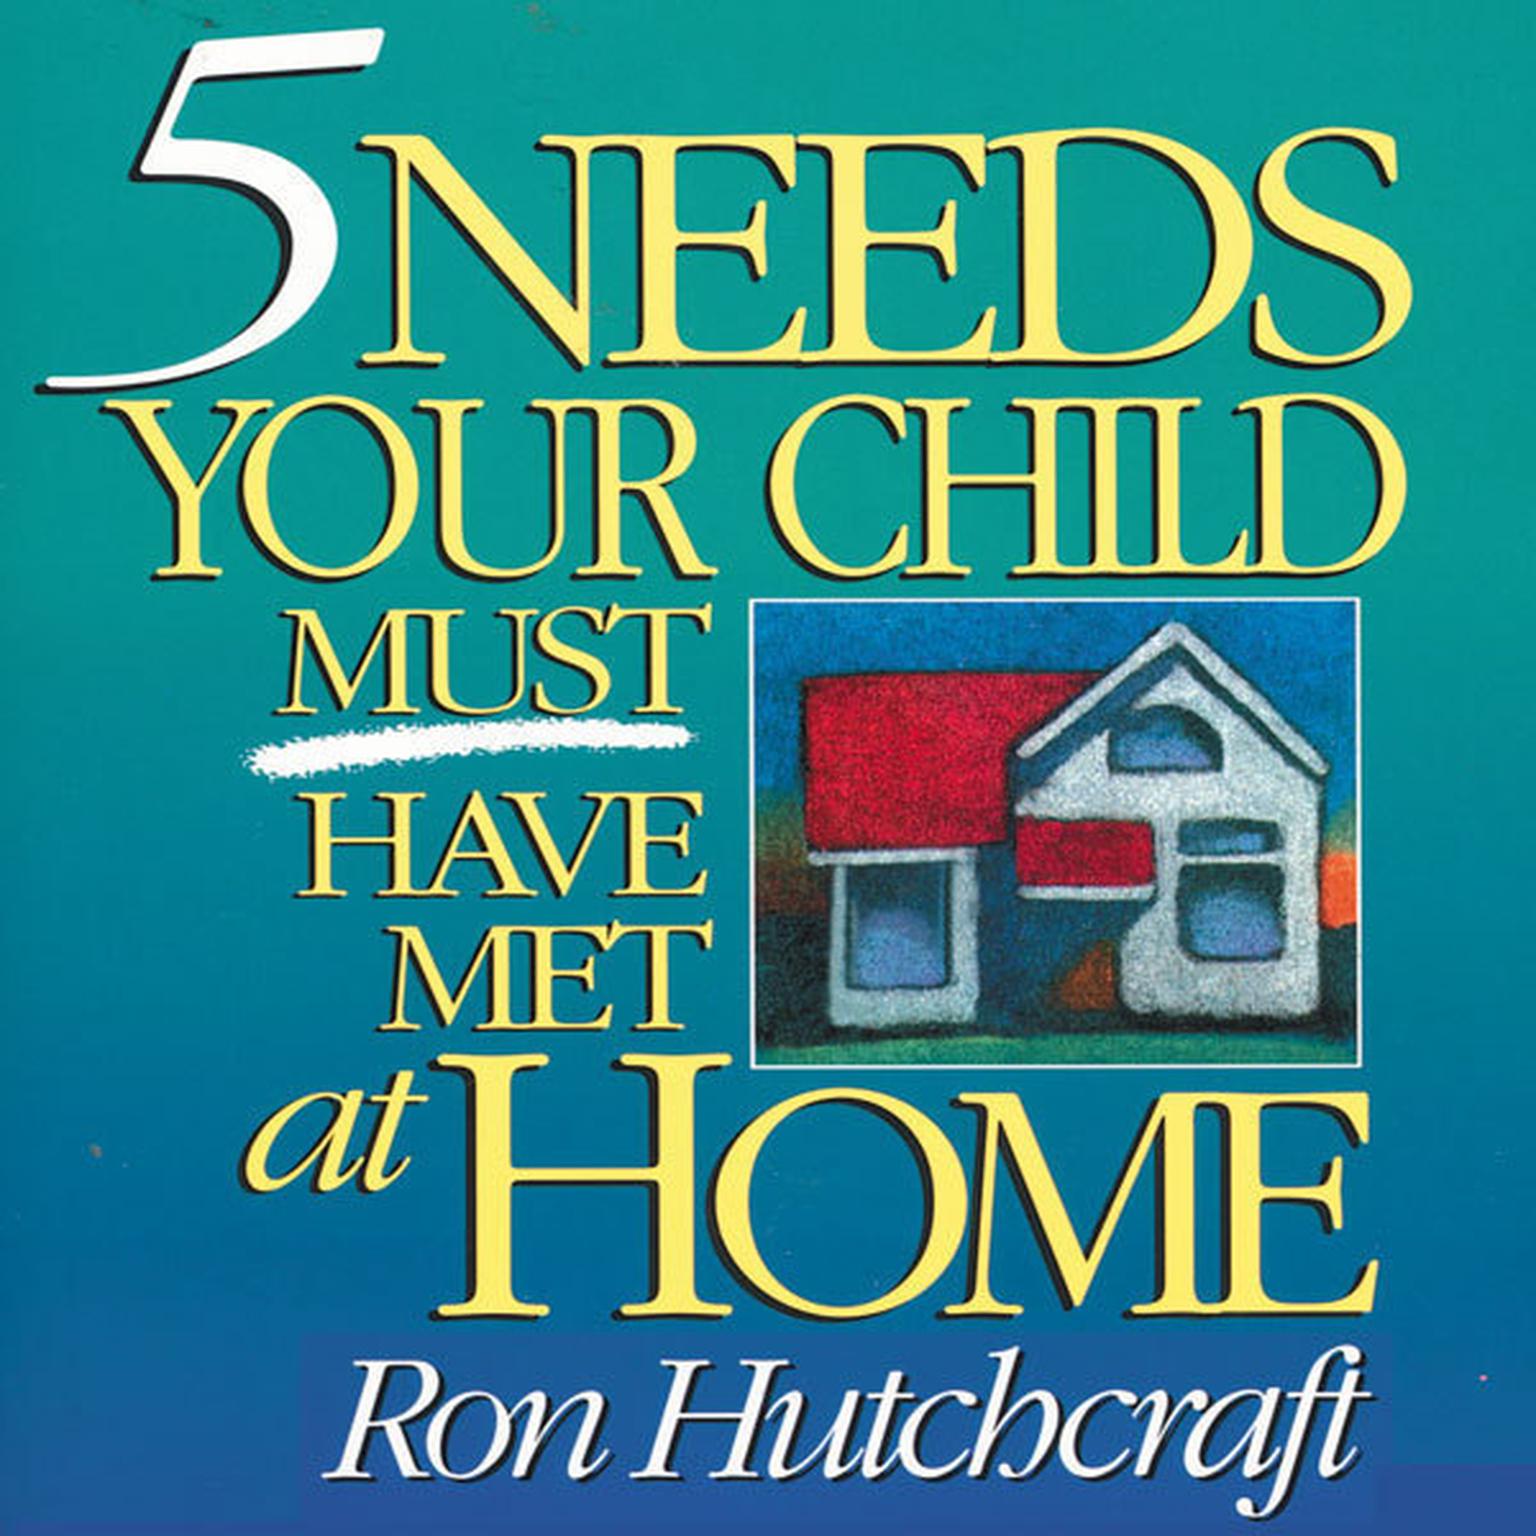 Five Needs Your Child Must Have Met at Home (Abridged) Audiobook, by Ron Hutchcraft